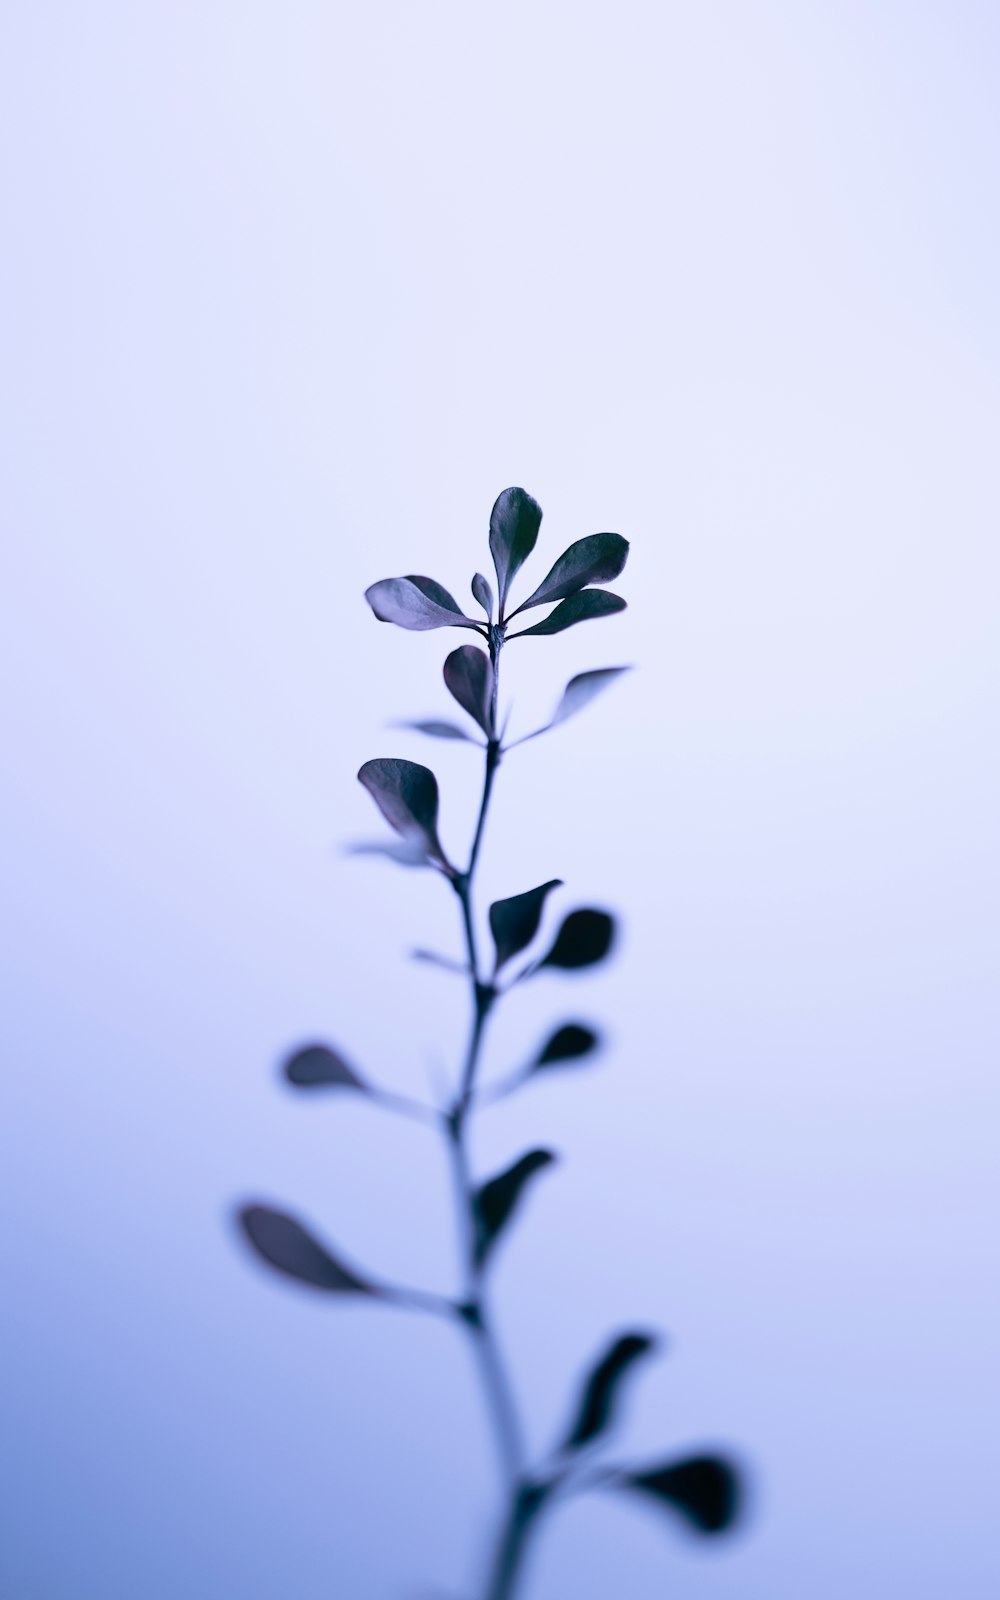 a plant is shown against a blue background